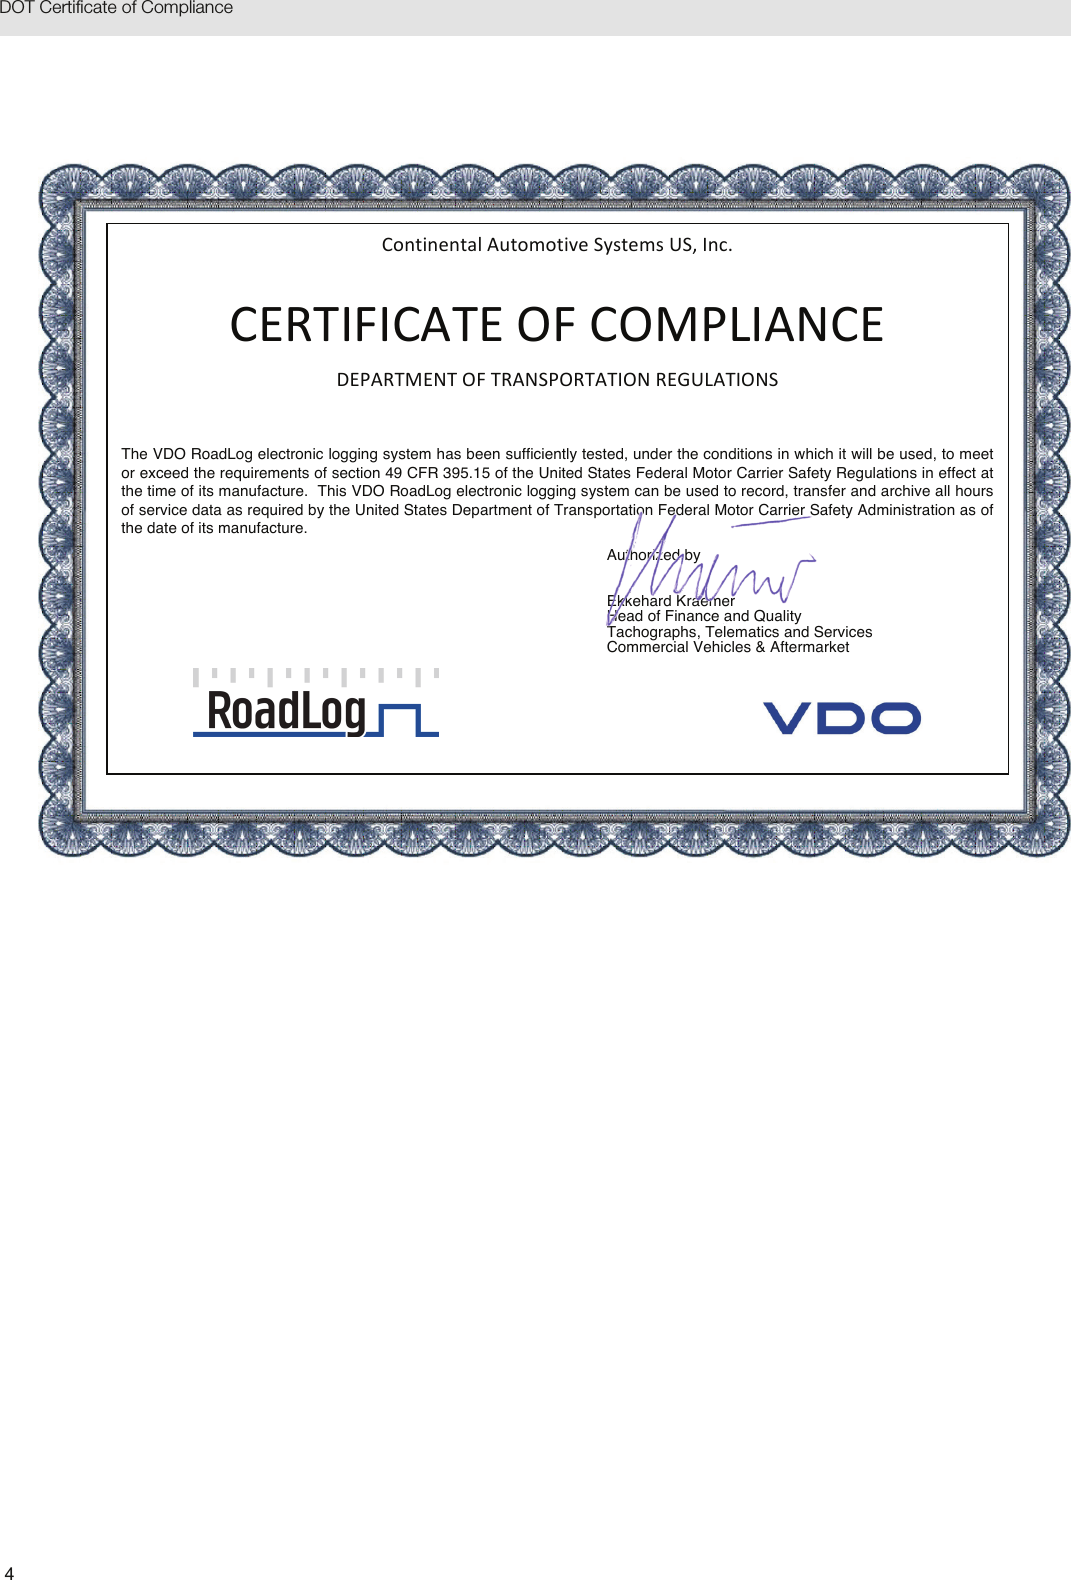 4DOT Certificate of ComplianceContinentalAutomotiveSystemsUS,Inc.CERTIFICATEOFCOMPLIANCEDEPARTMENTOFTRANSPORTATIONREGULATIONSThe VDO RoadLog electronic logging system has been sufficiently tested, under the conditions in which it will be used, to meet or exceed the requirements of section 49 CFR 395.15 of the United States Federal Motor Carrier Safety Regulations in effect at the time of its manufacture.  This VDO RoadLog electronic logging system can be used to record, transfer and archive all hours of service data as required by the United States Department of Transportation Federal Motor Carrier Safety Administration as of the date of its manufacture. Authorized by   Ekkehard Kraemer Head of Finance and Quality Tachographs, Telematics and Services Commercial Vehicles &amp; Aftermarket 